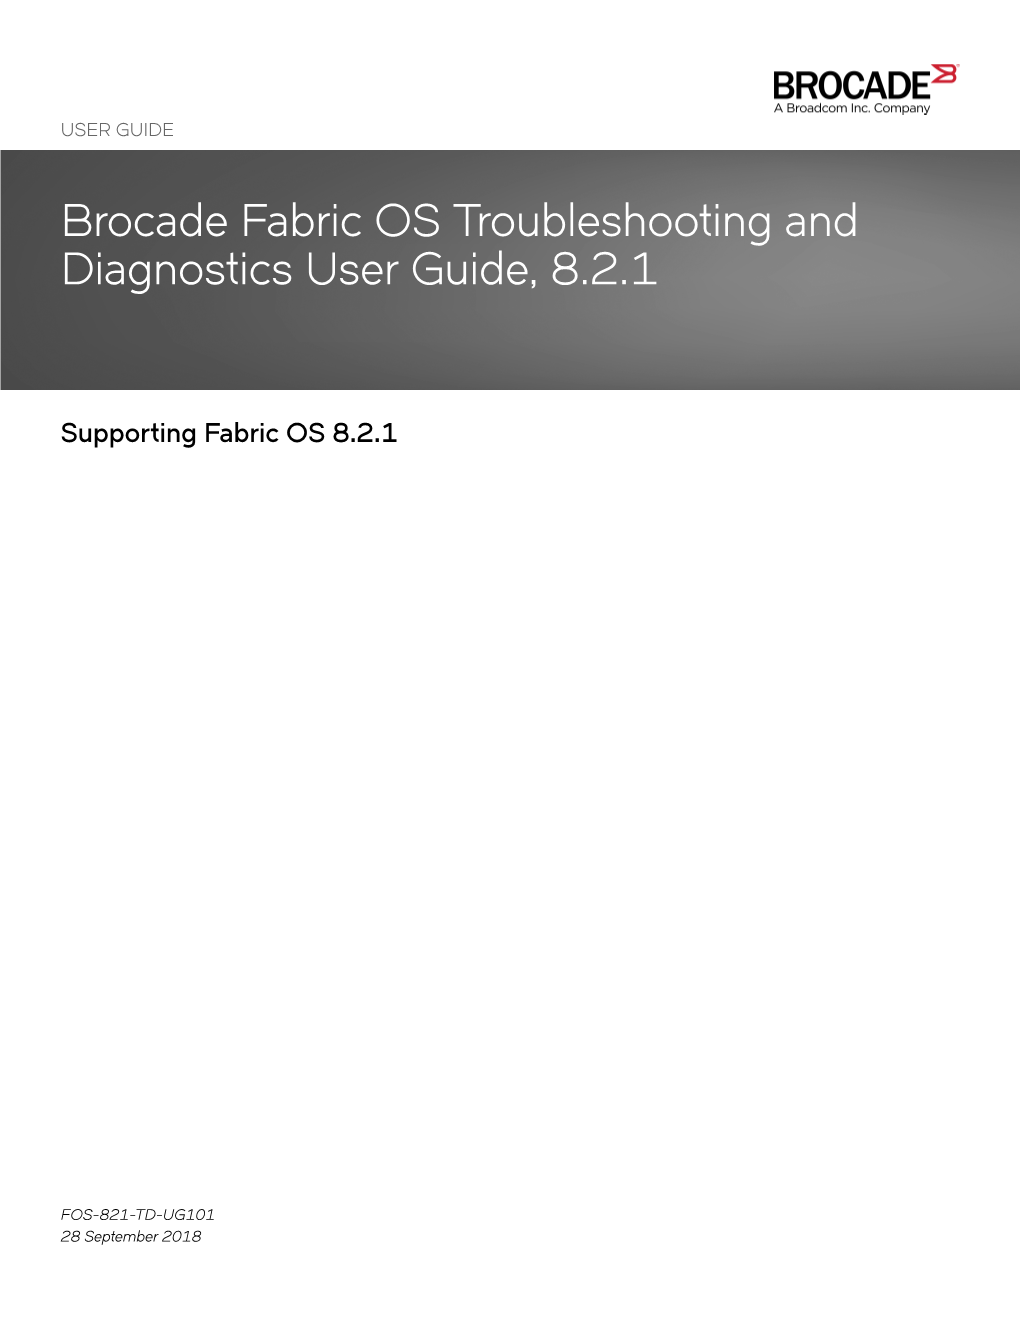 Brocade Fabric OS Troubleshooting and Diagnostics User Guide, 8.2.1